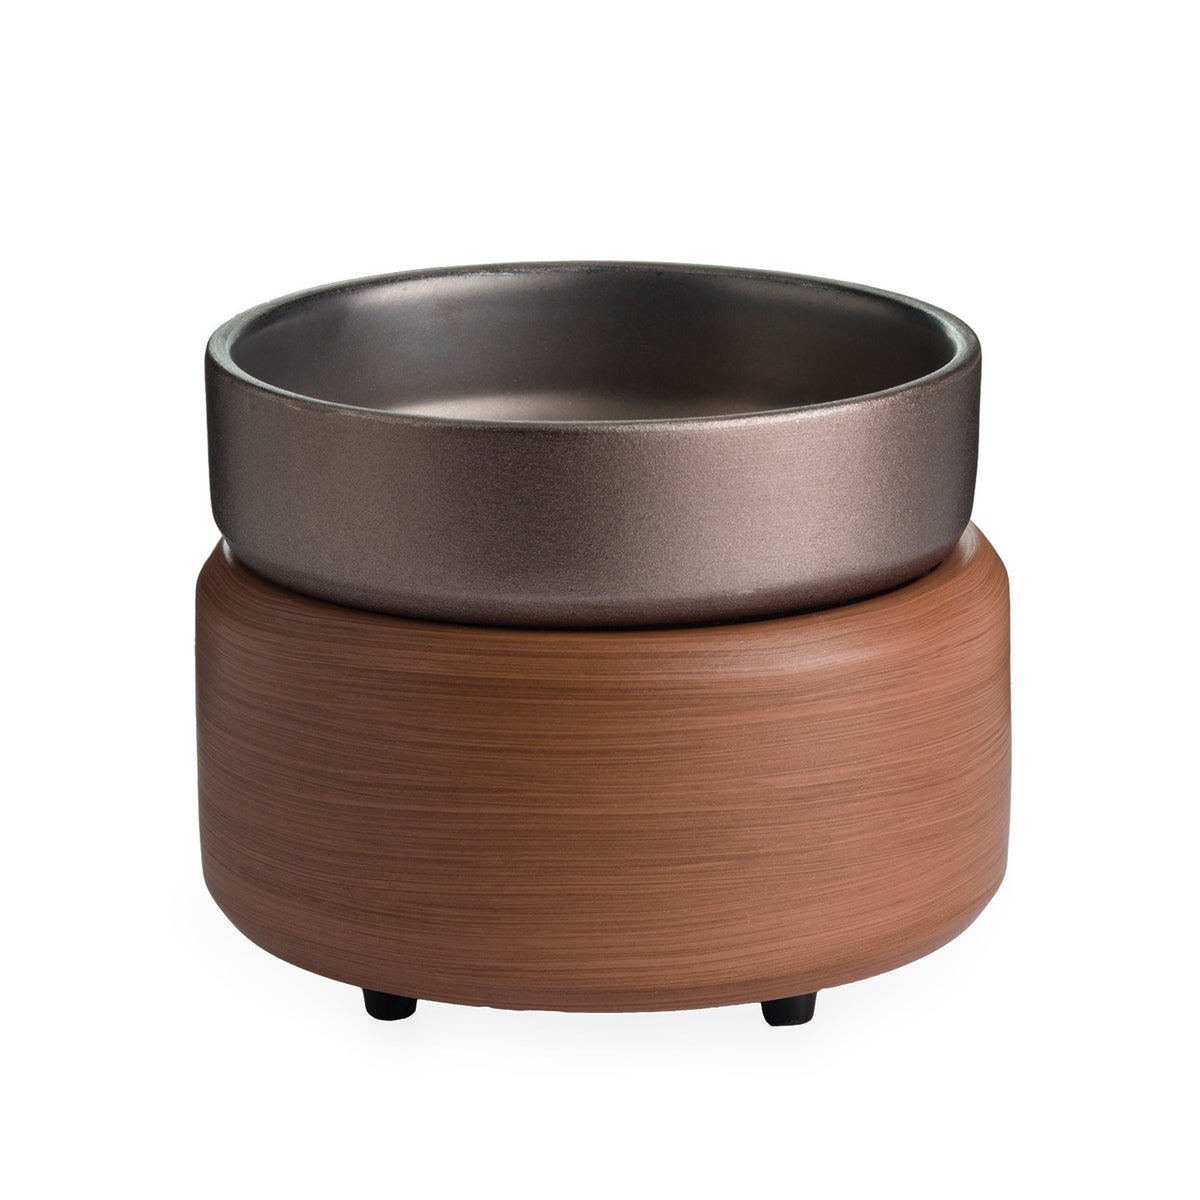 Pewter & Walnut 2 in 1 Candle & Wax Melter